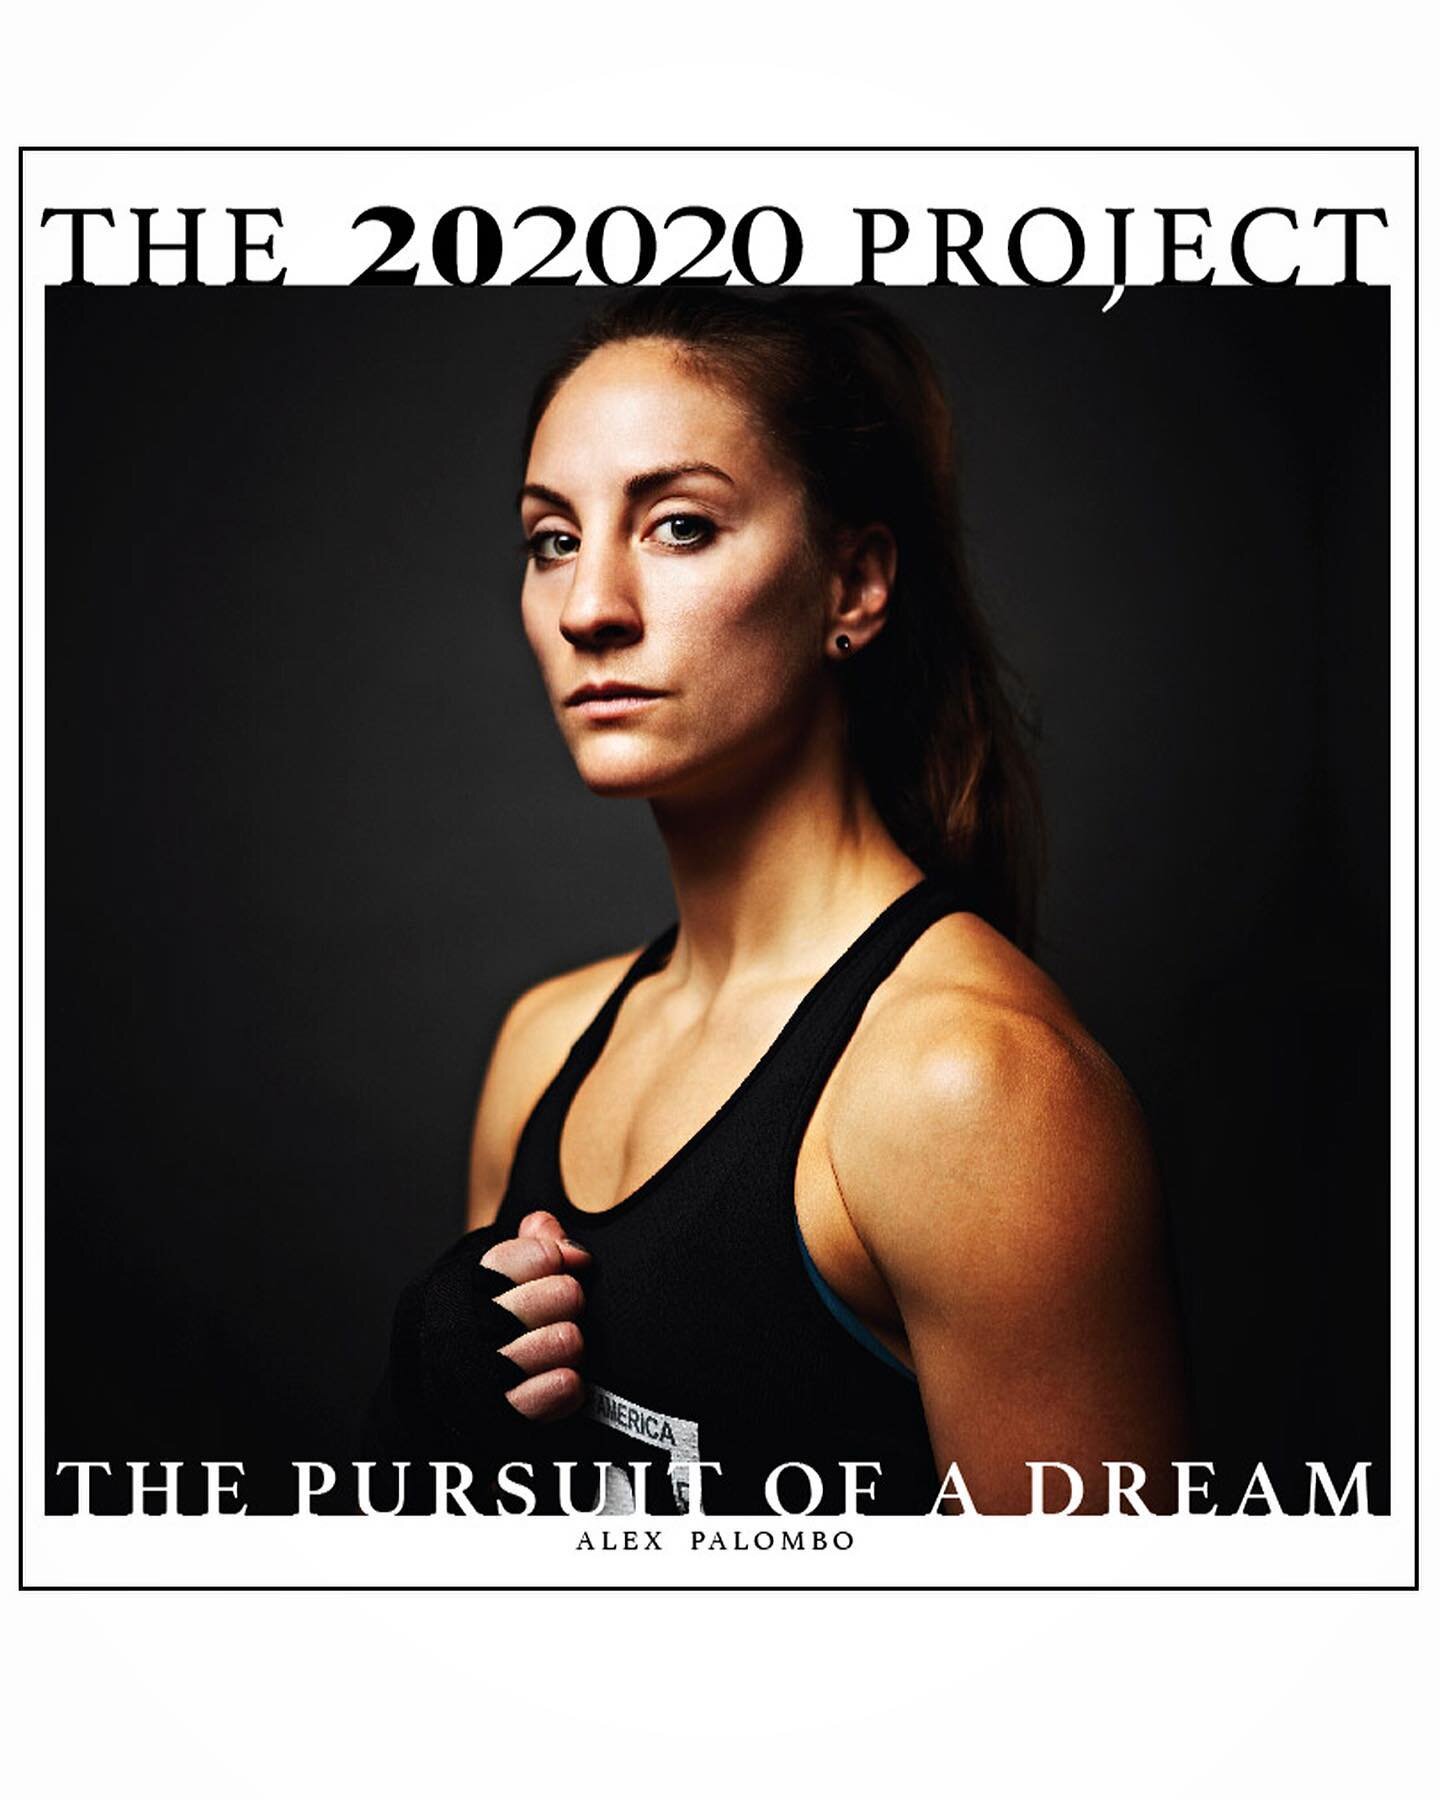 Super excited to let everyone know that &ldquo;The 20 2020 project-the pursuit of a dream&rdquo; book is on pre-sale now!
20% of the pre-sales of each book goes back to the athletes Olympic pursuit.
(Those of you in it, you&rsquo;re already getting a